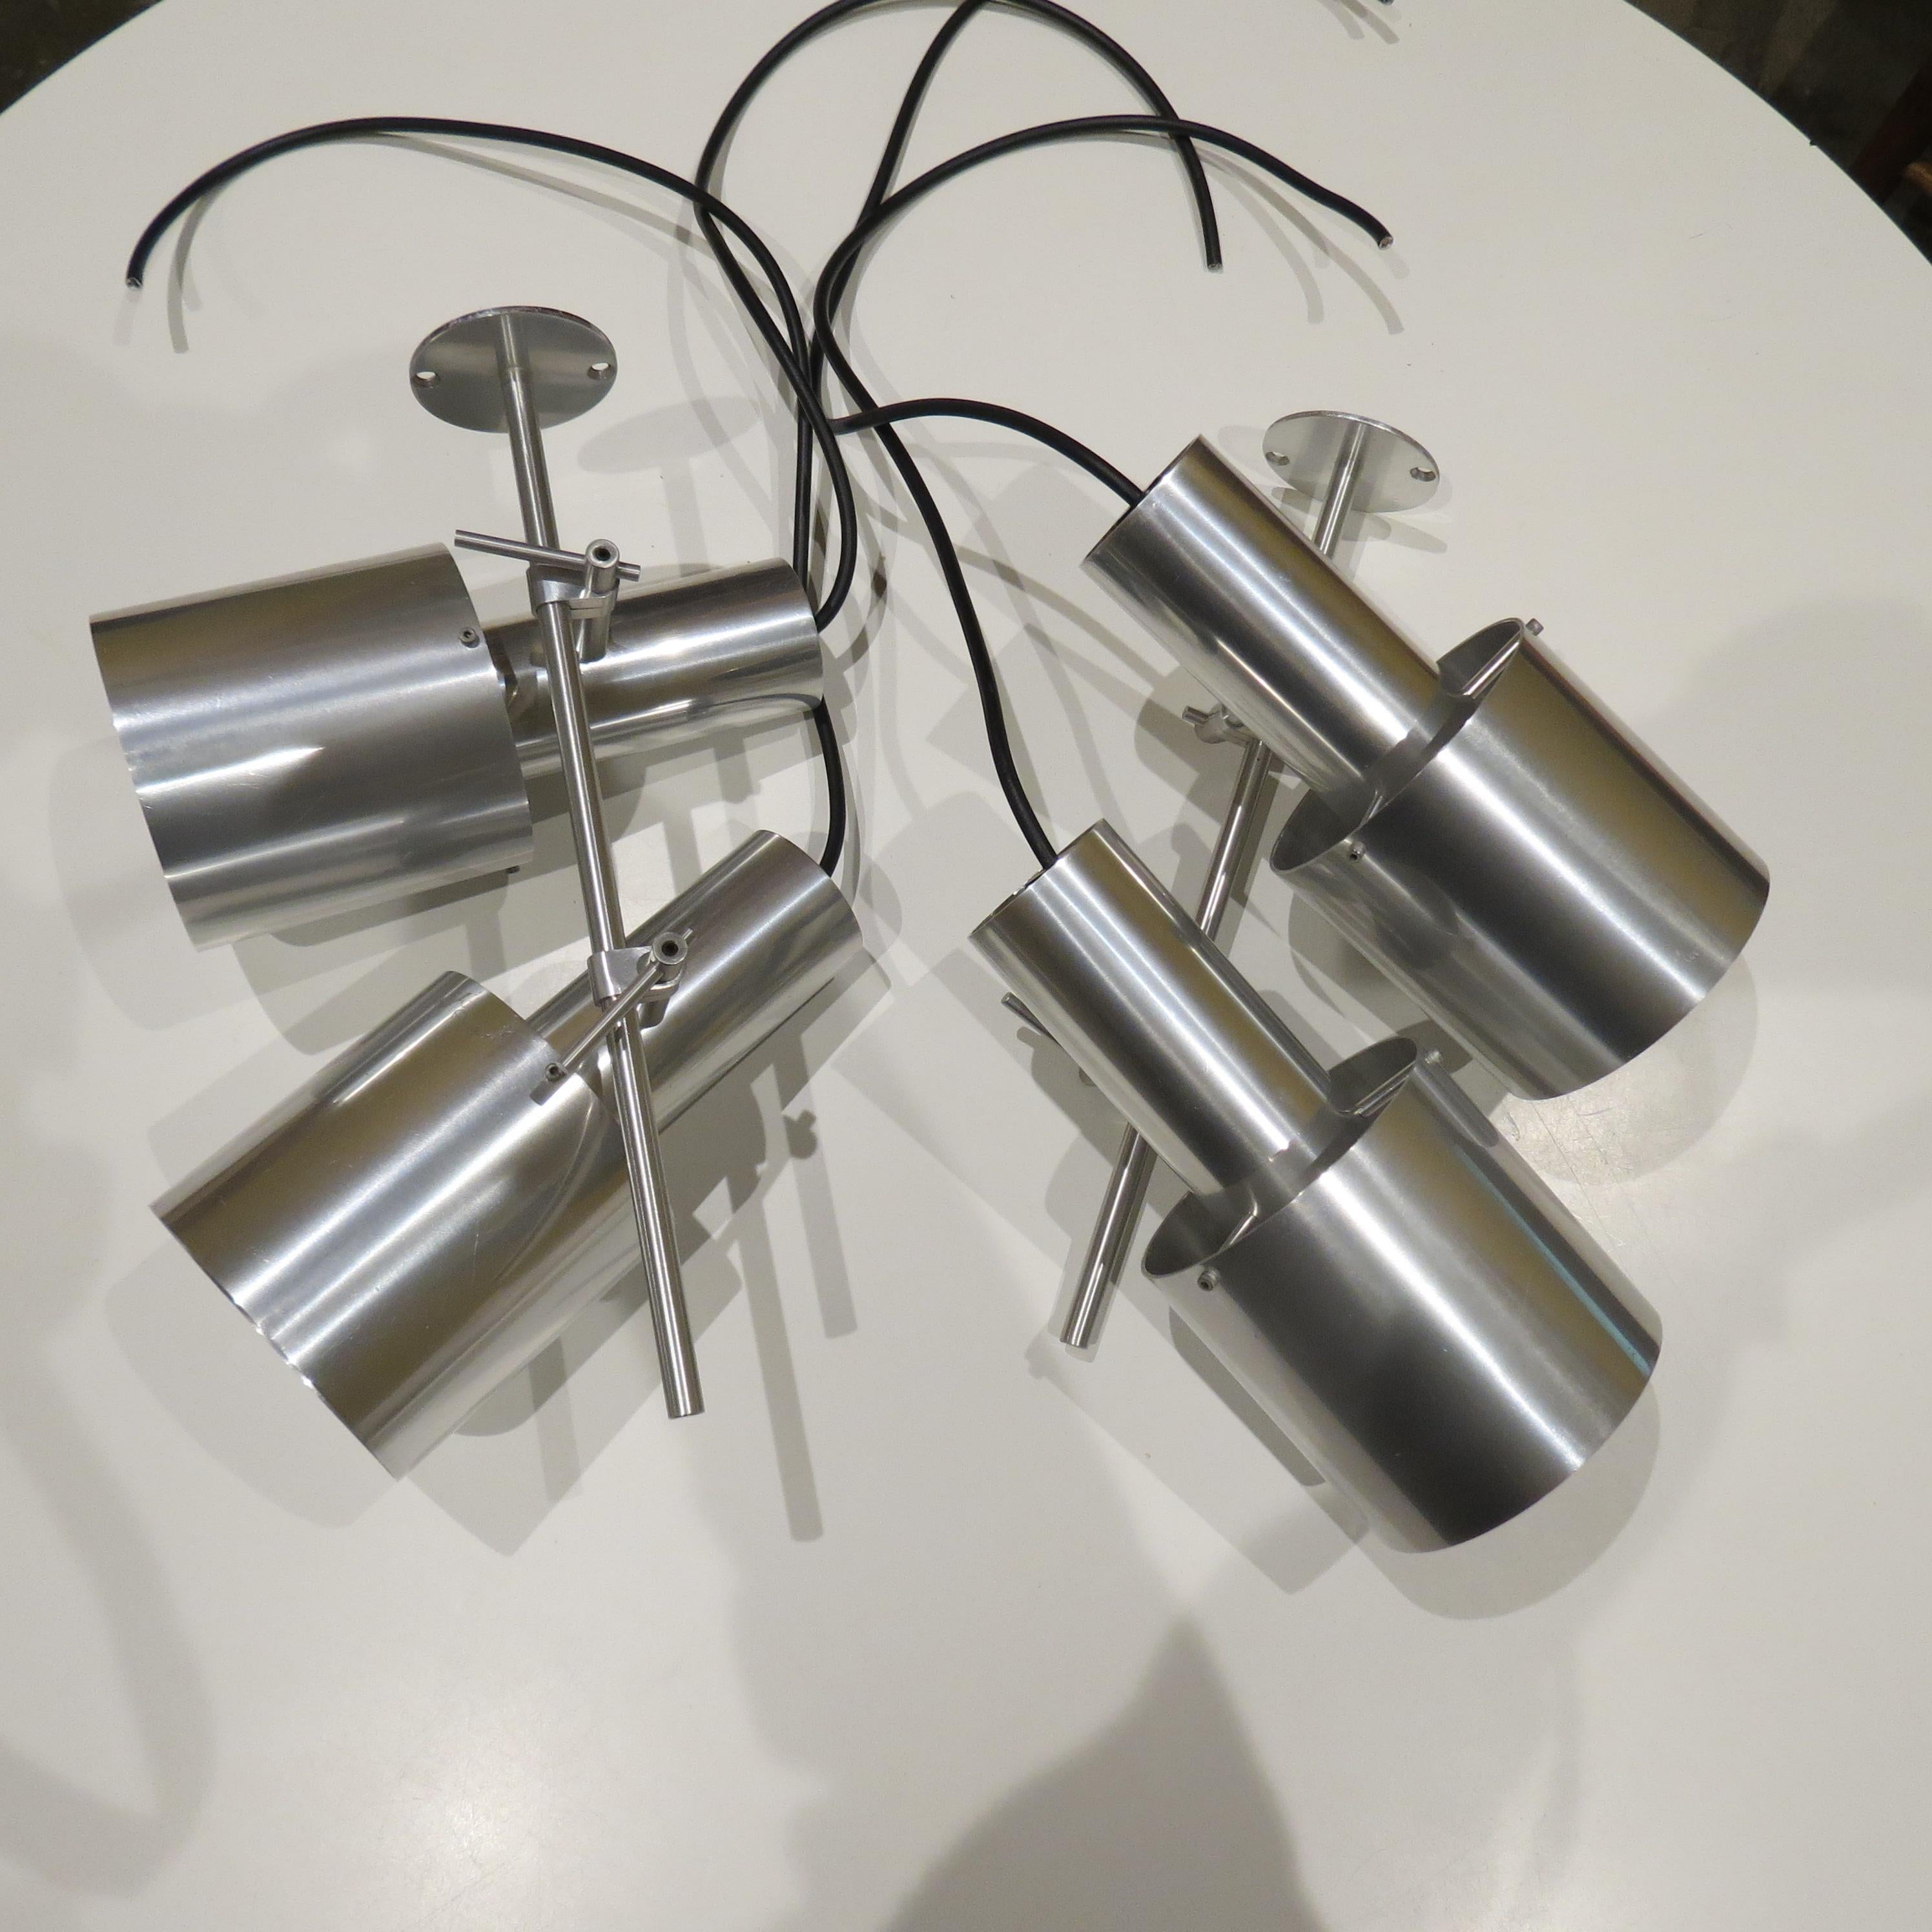 Rare aluminium ceiling light designed by Peter Nelson and produced by Architectural Lighting Ltd. Dates from the early 1960s.  The two spot lamps are adjustable, each lamp moves up and down the rod and also tilts to the required angle. Made from